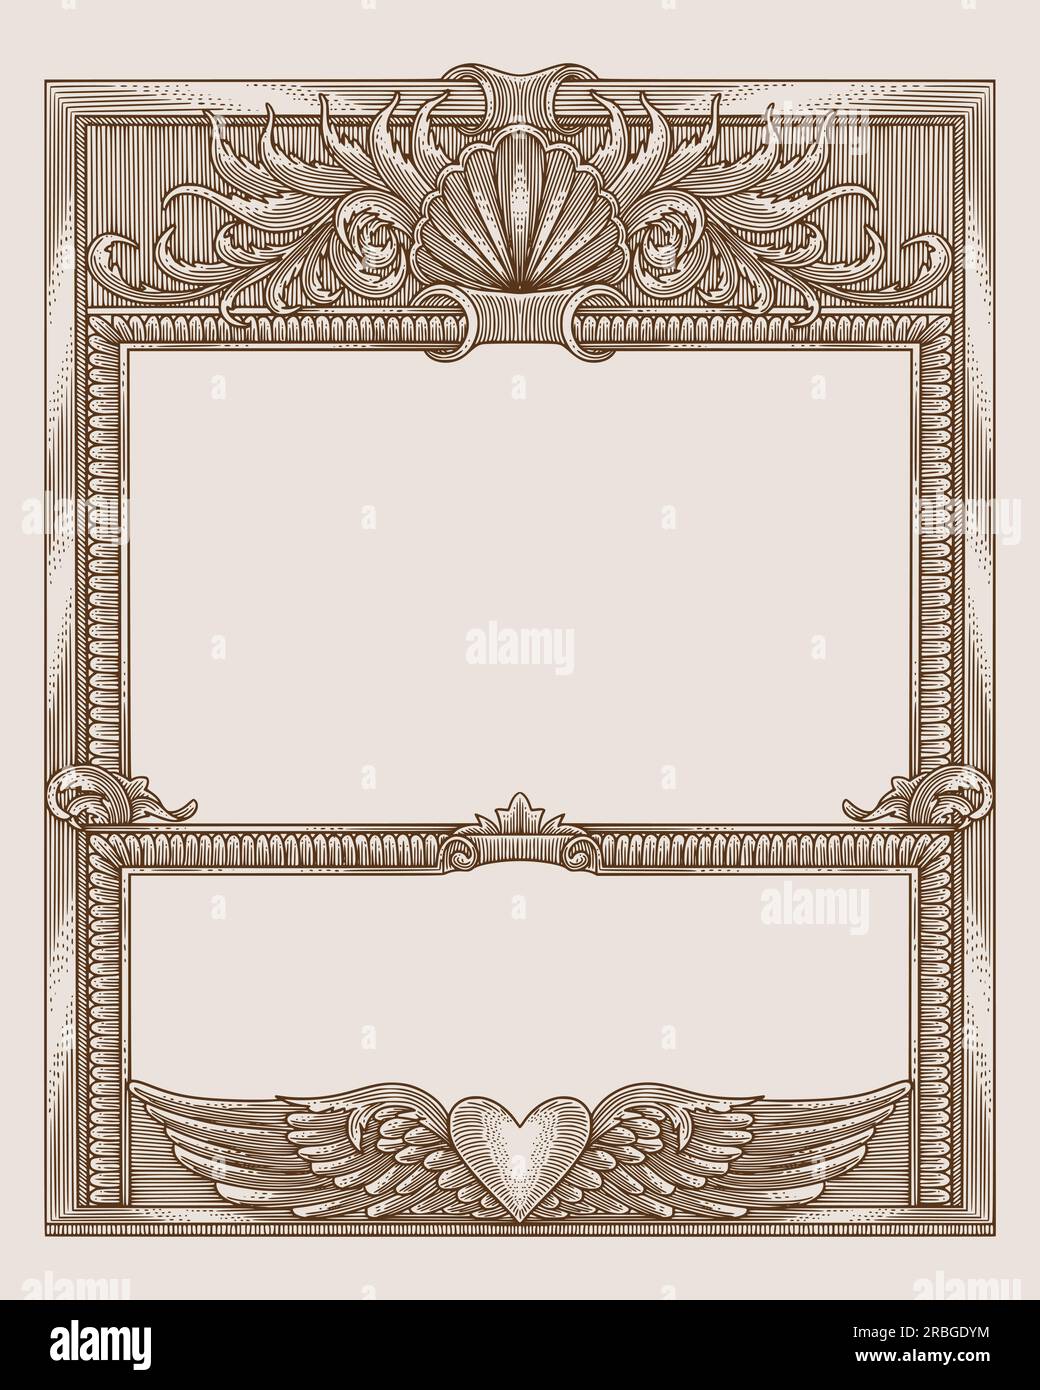 old square frame with engraving drawing style. vector vintage illustration Stock Vector